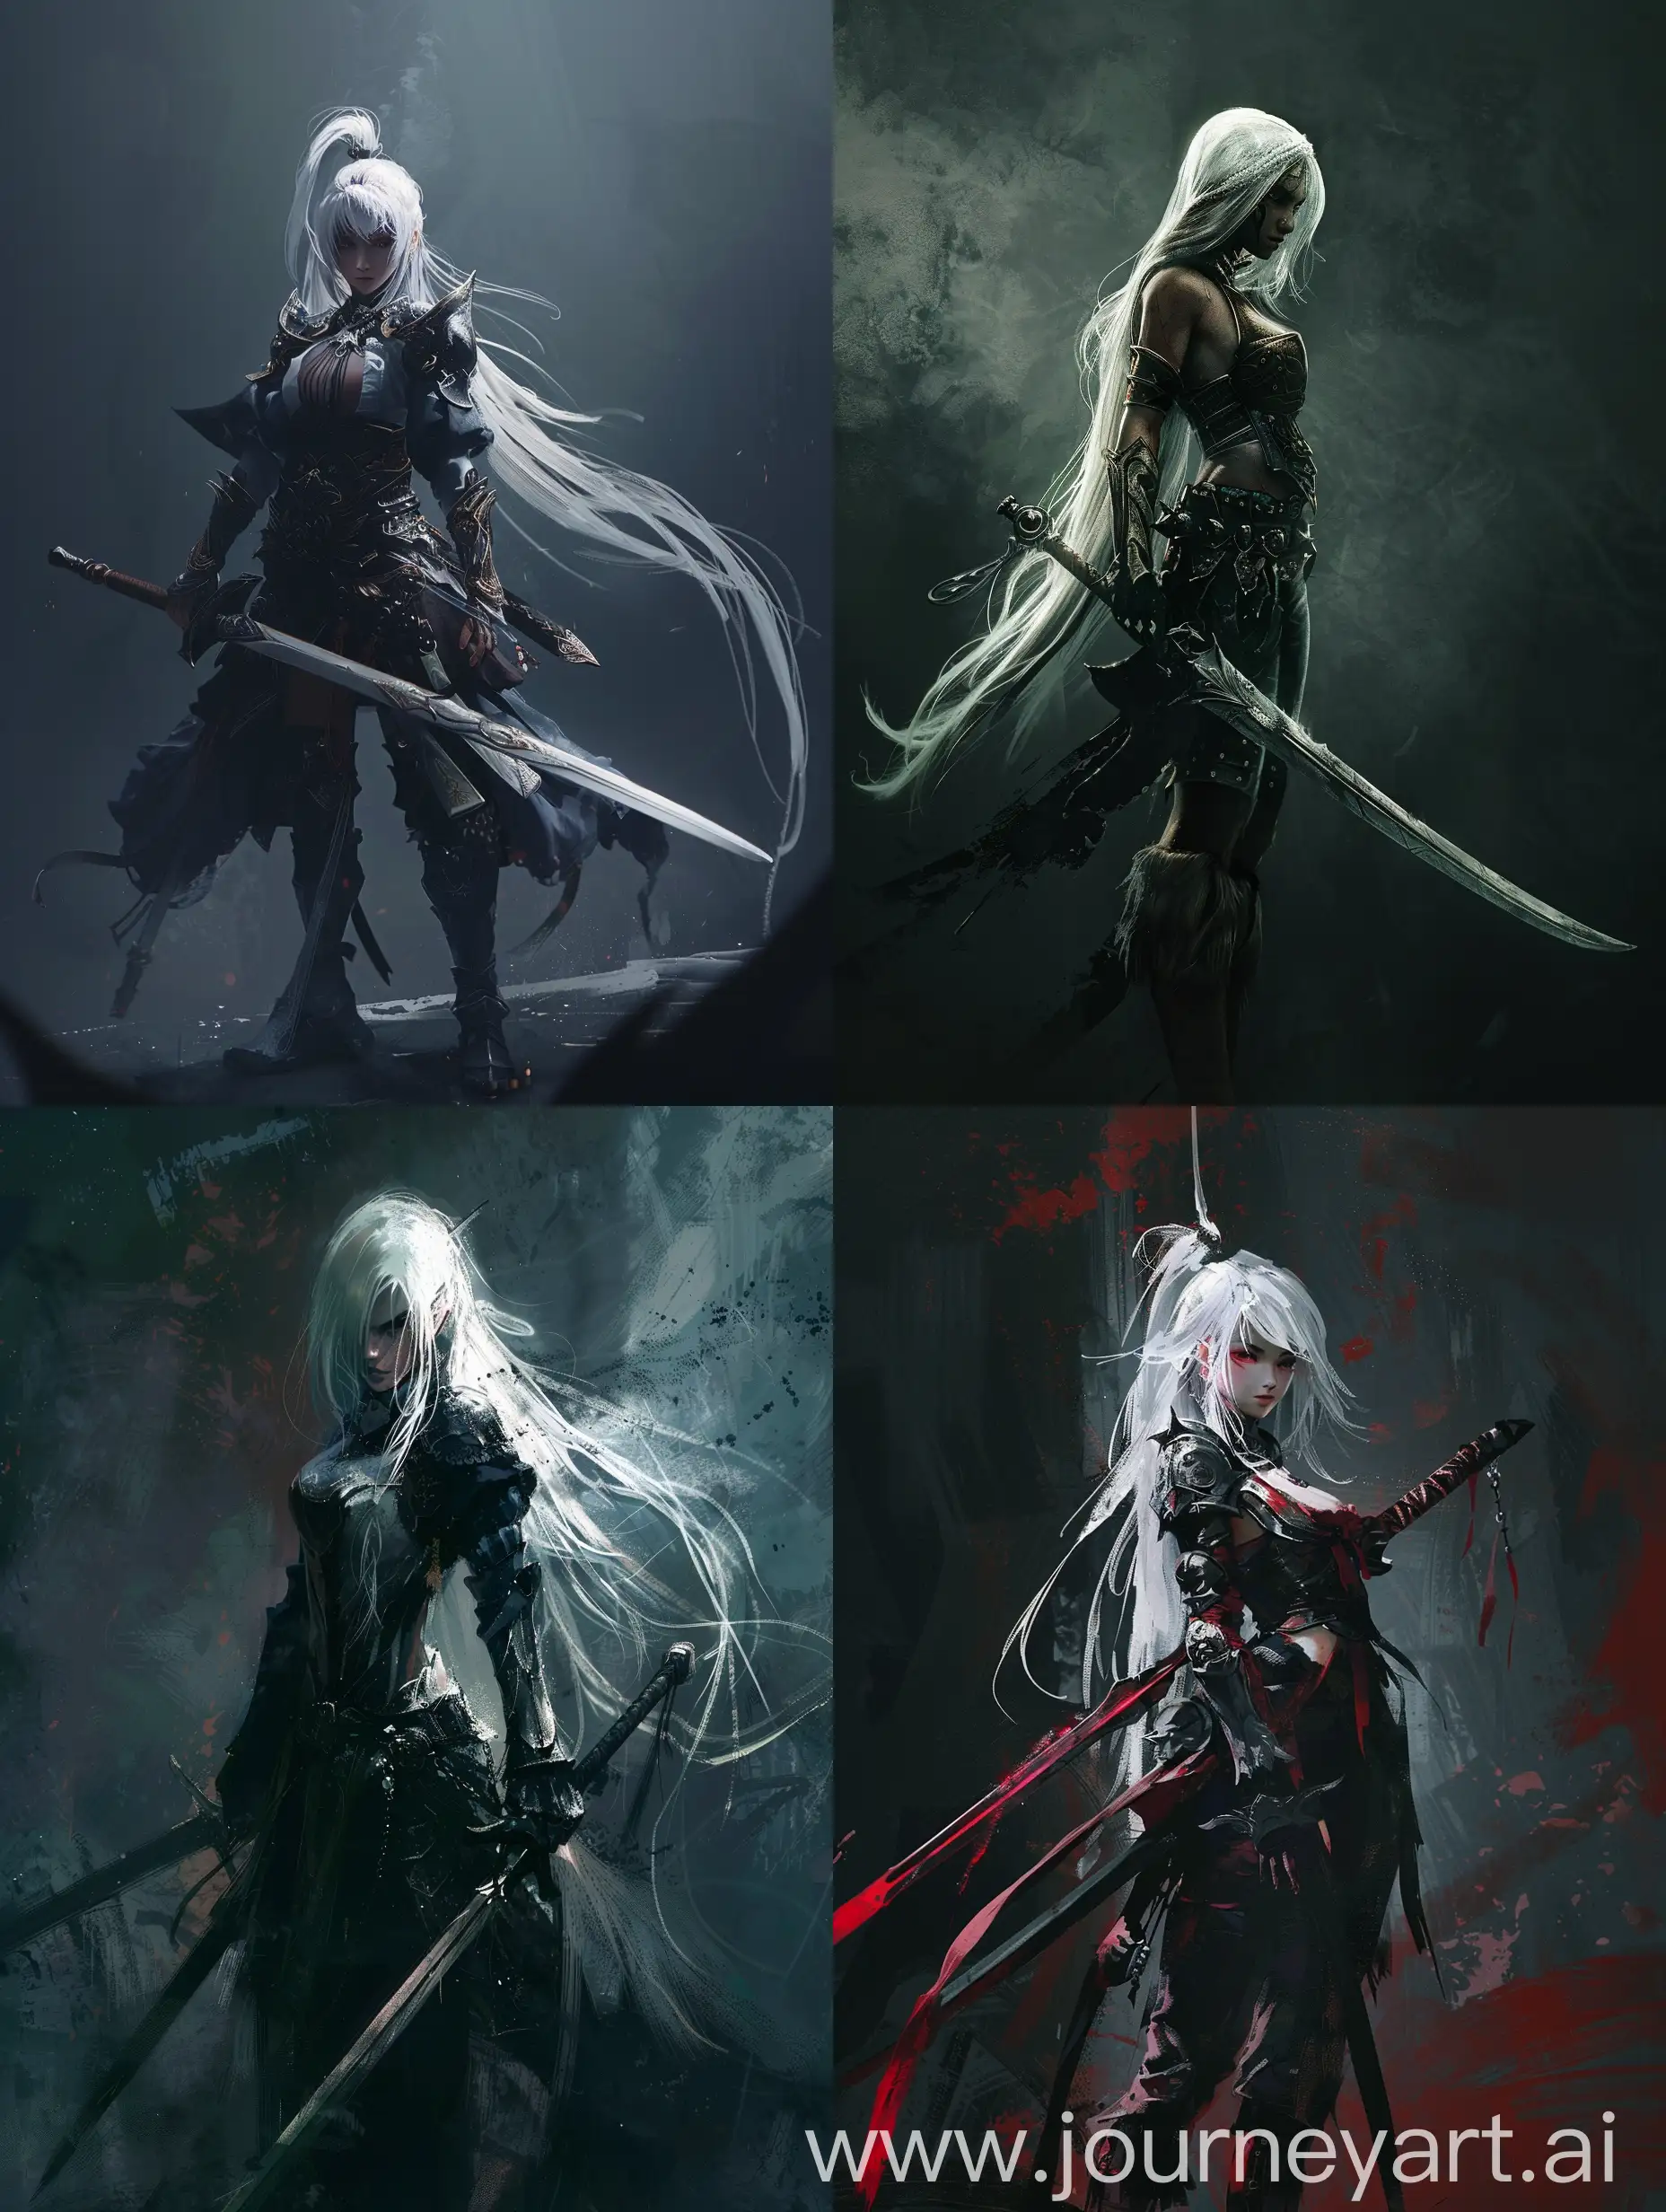 Brave-WhiteHaired-Warrior-Girl-with-Sword-in-Dark-Ambience